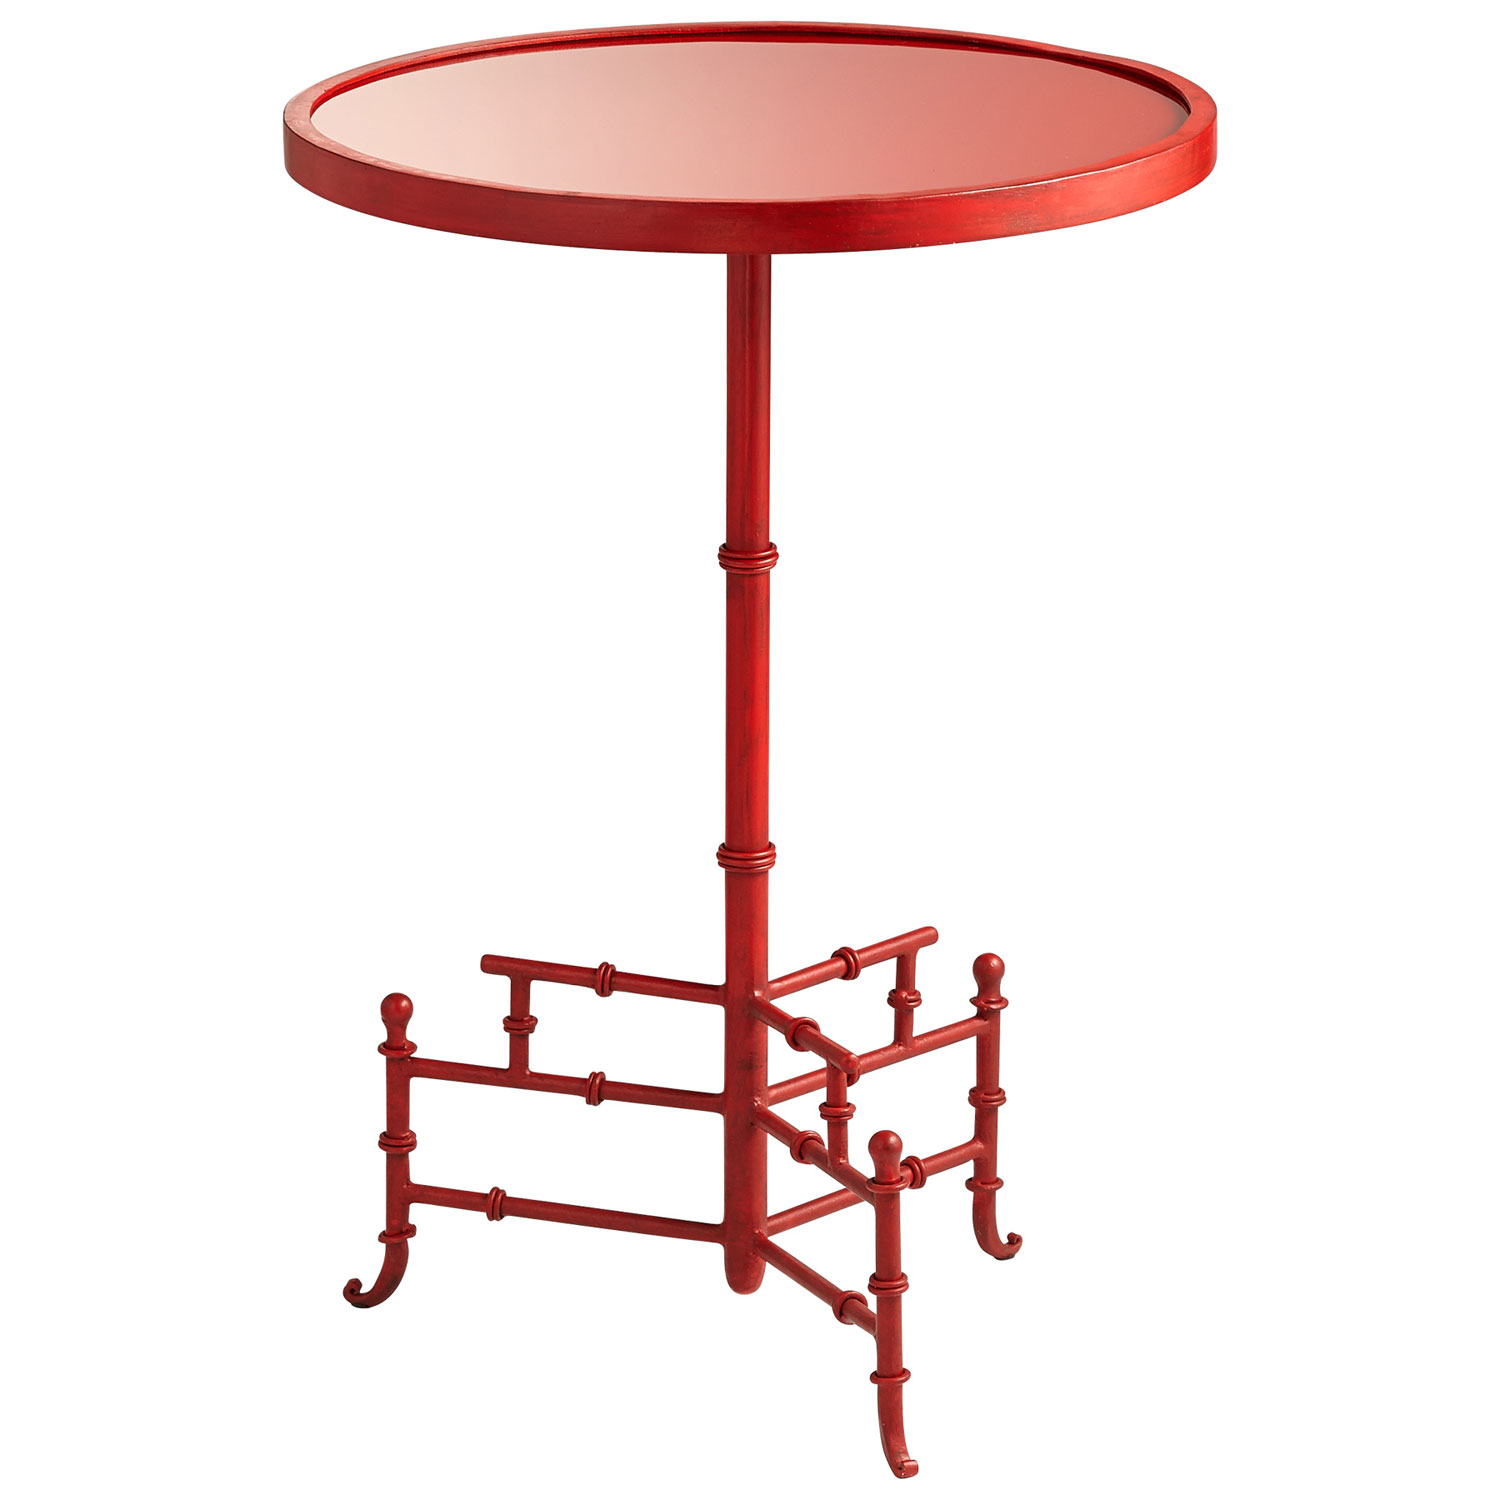 cyan design liora chinese red side table bellacor stratford wicker folding accent bronze hover zoom narrow trestle dining wood coffee with metal frame round counter height and